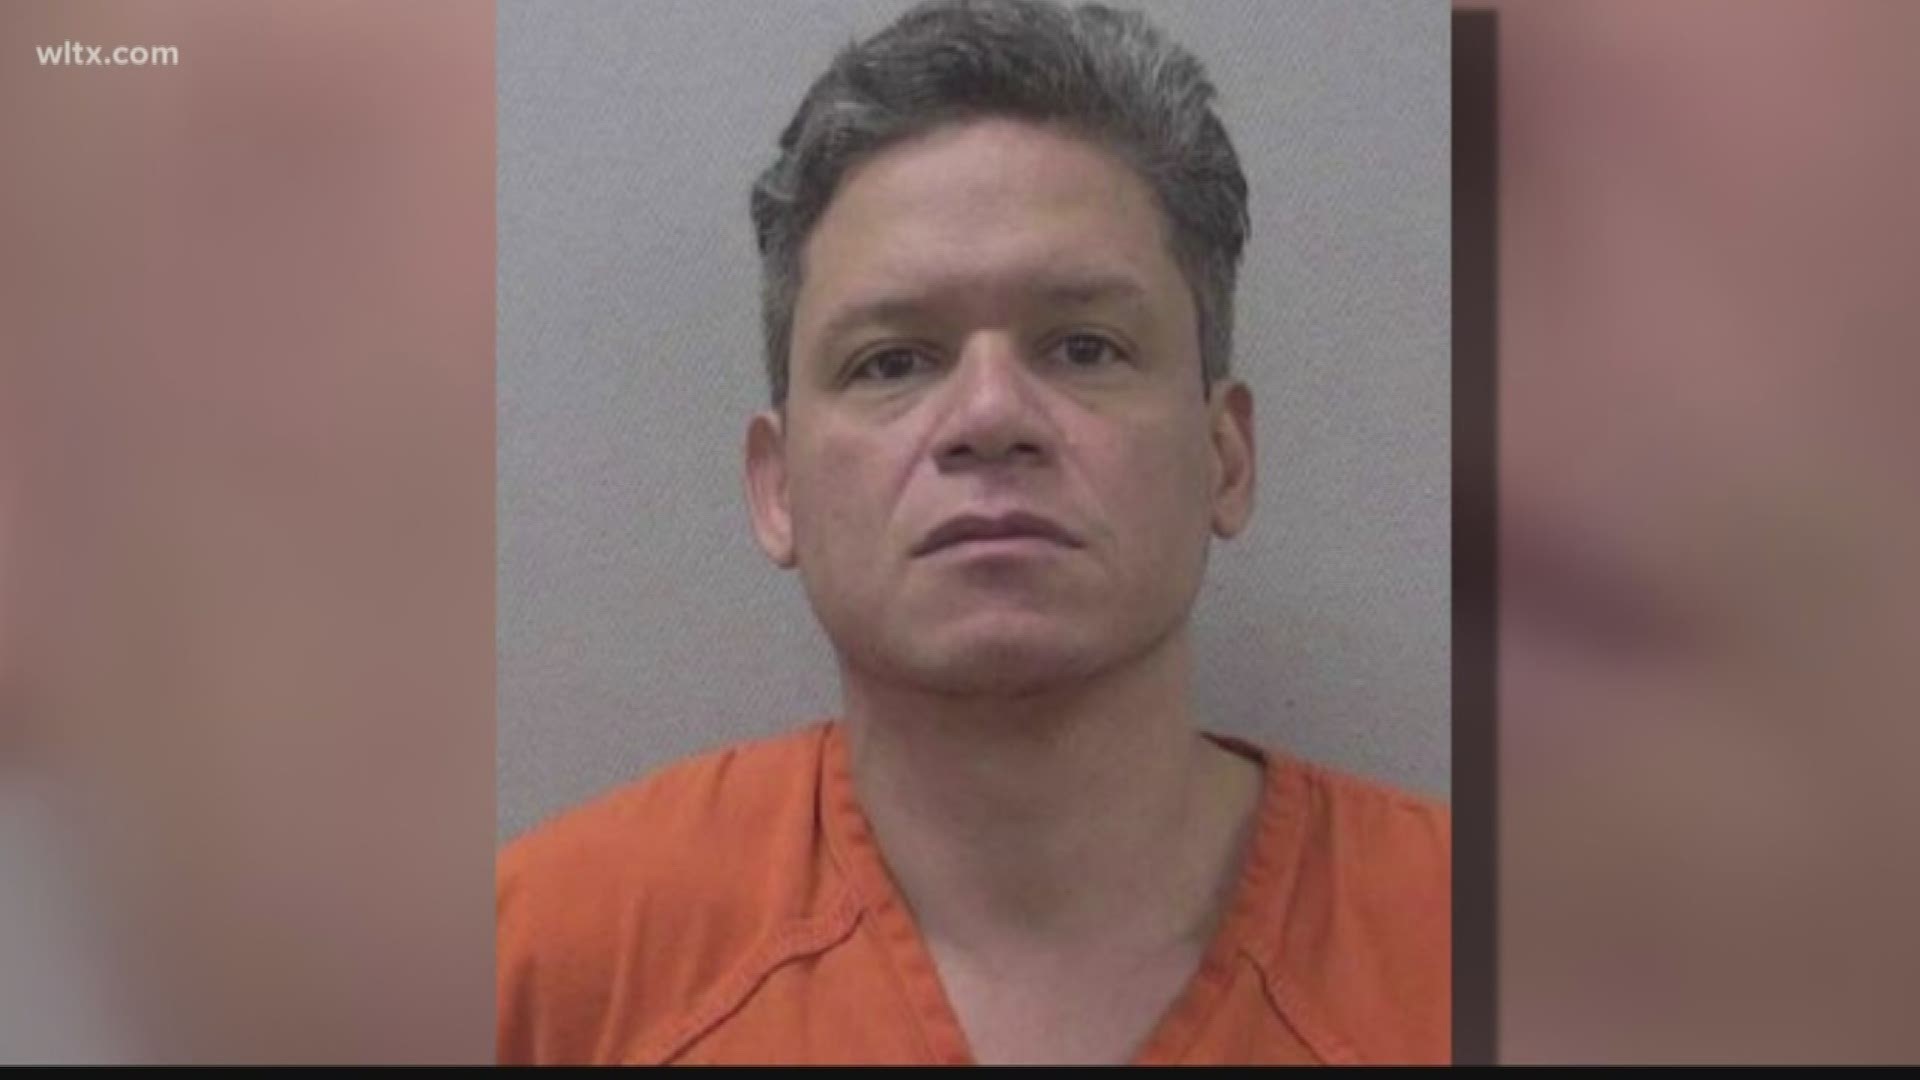 A former elementary school teacher has been extradited from Ecuador to Lexington County on charges of sexual contact with a minor.